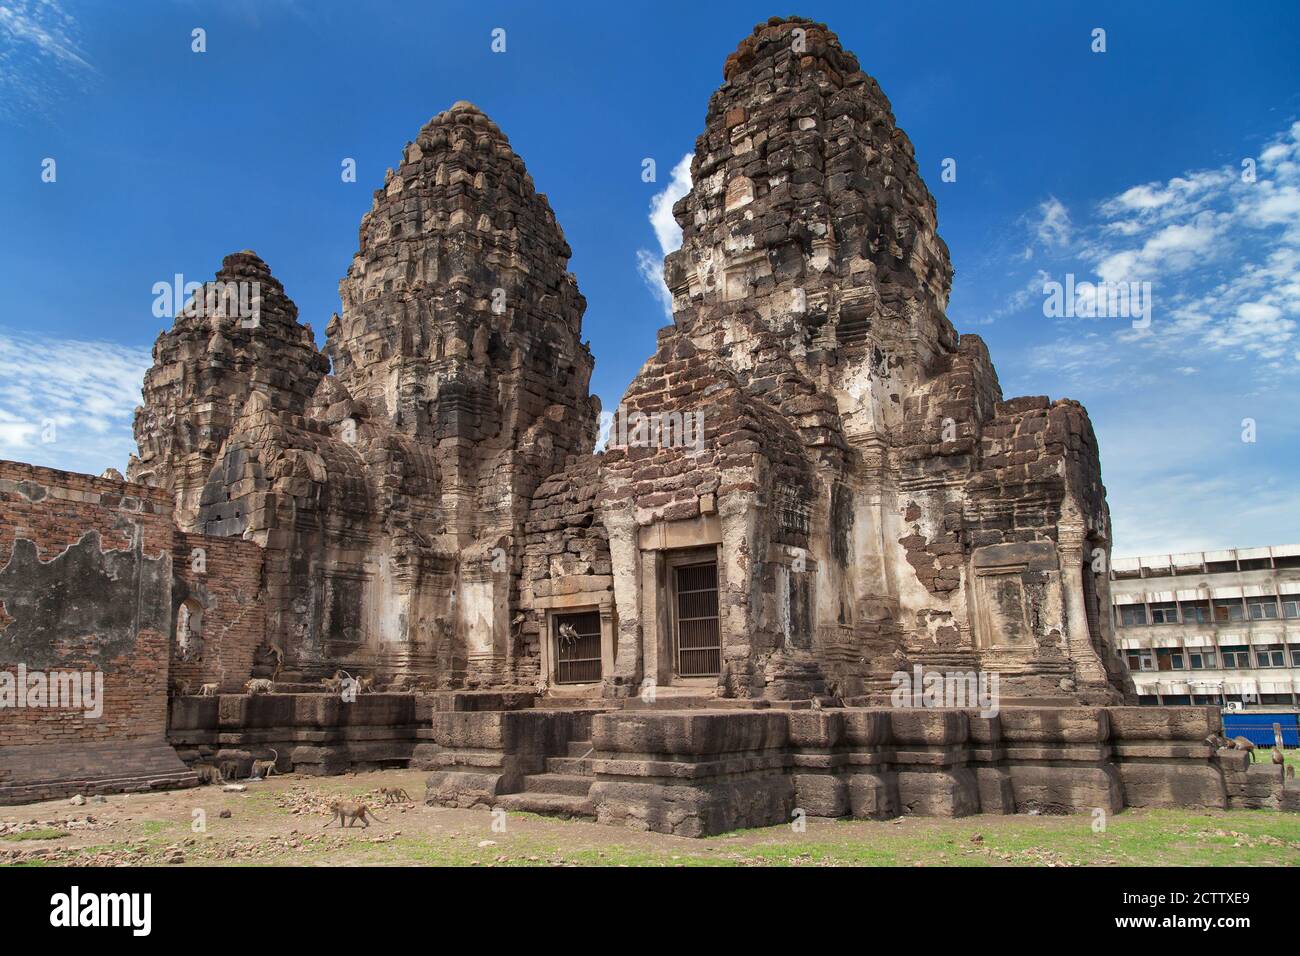 Temple of the Monkeys in Lopburi, Thailand. Stock Photo